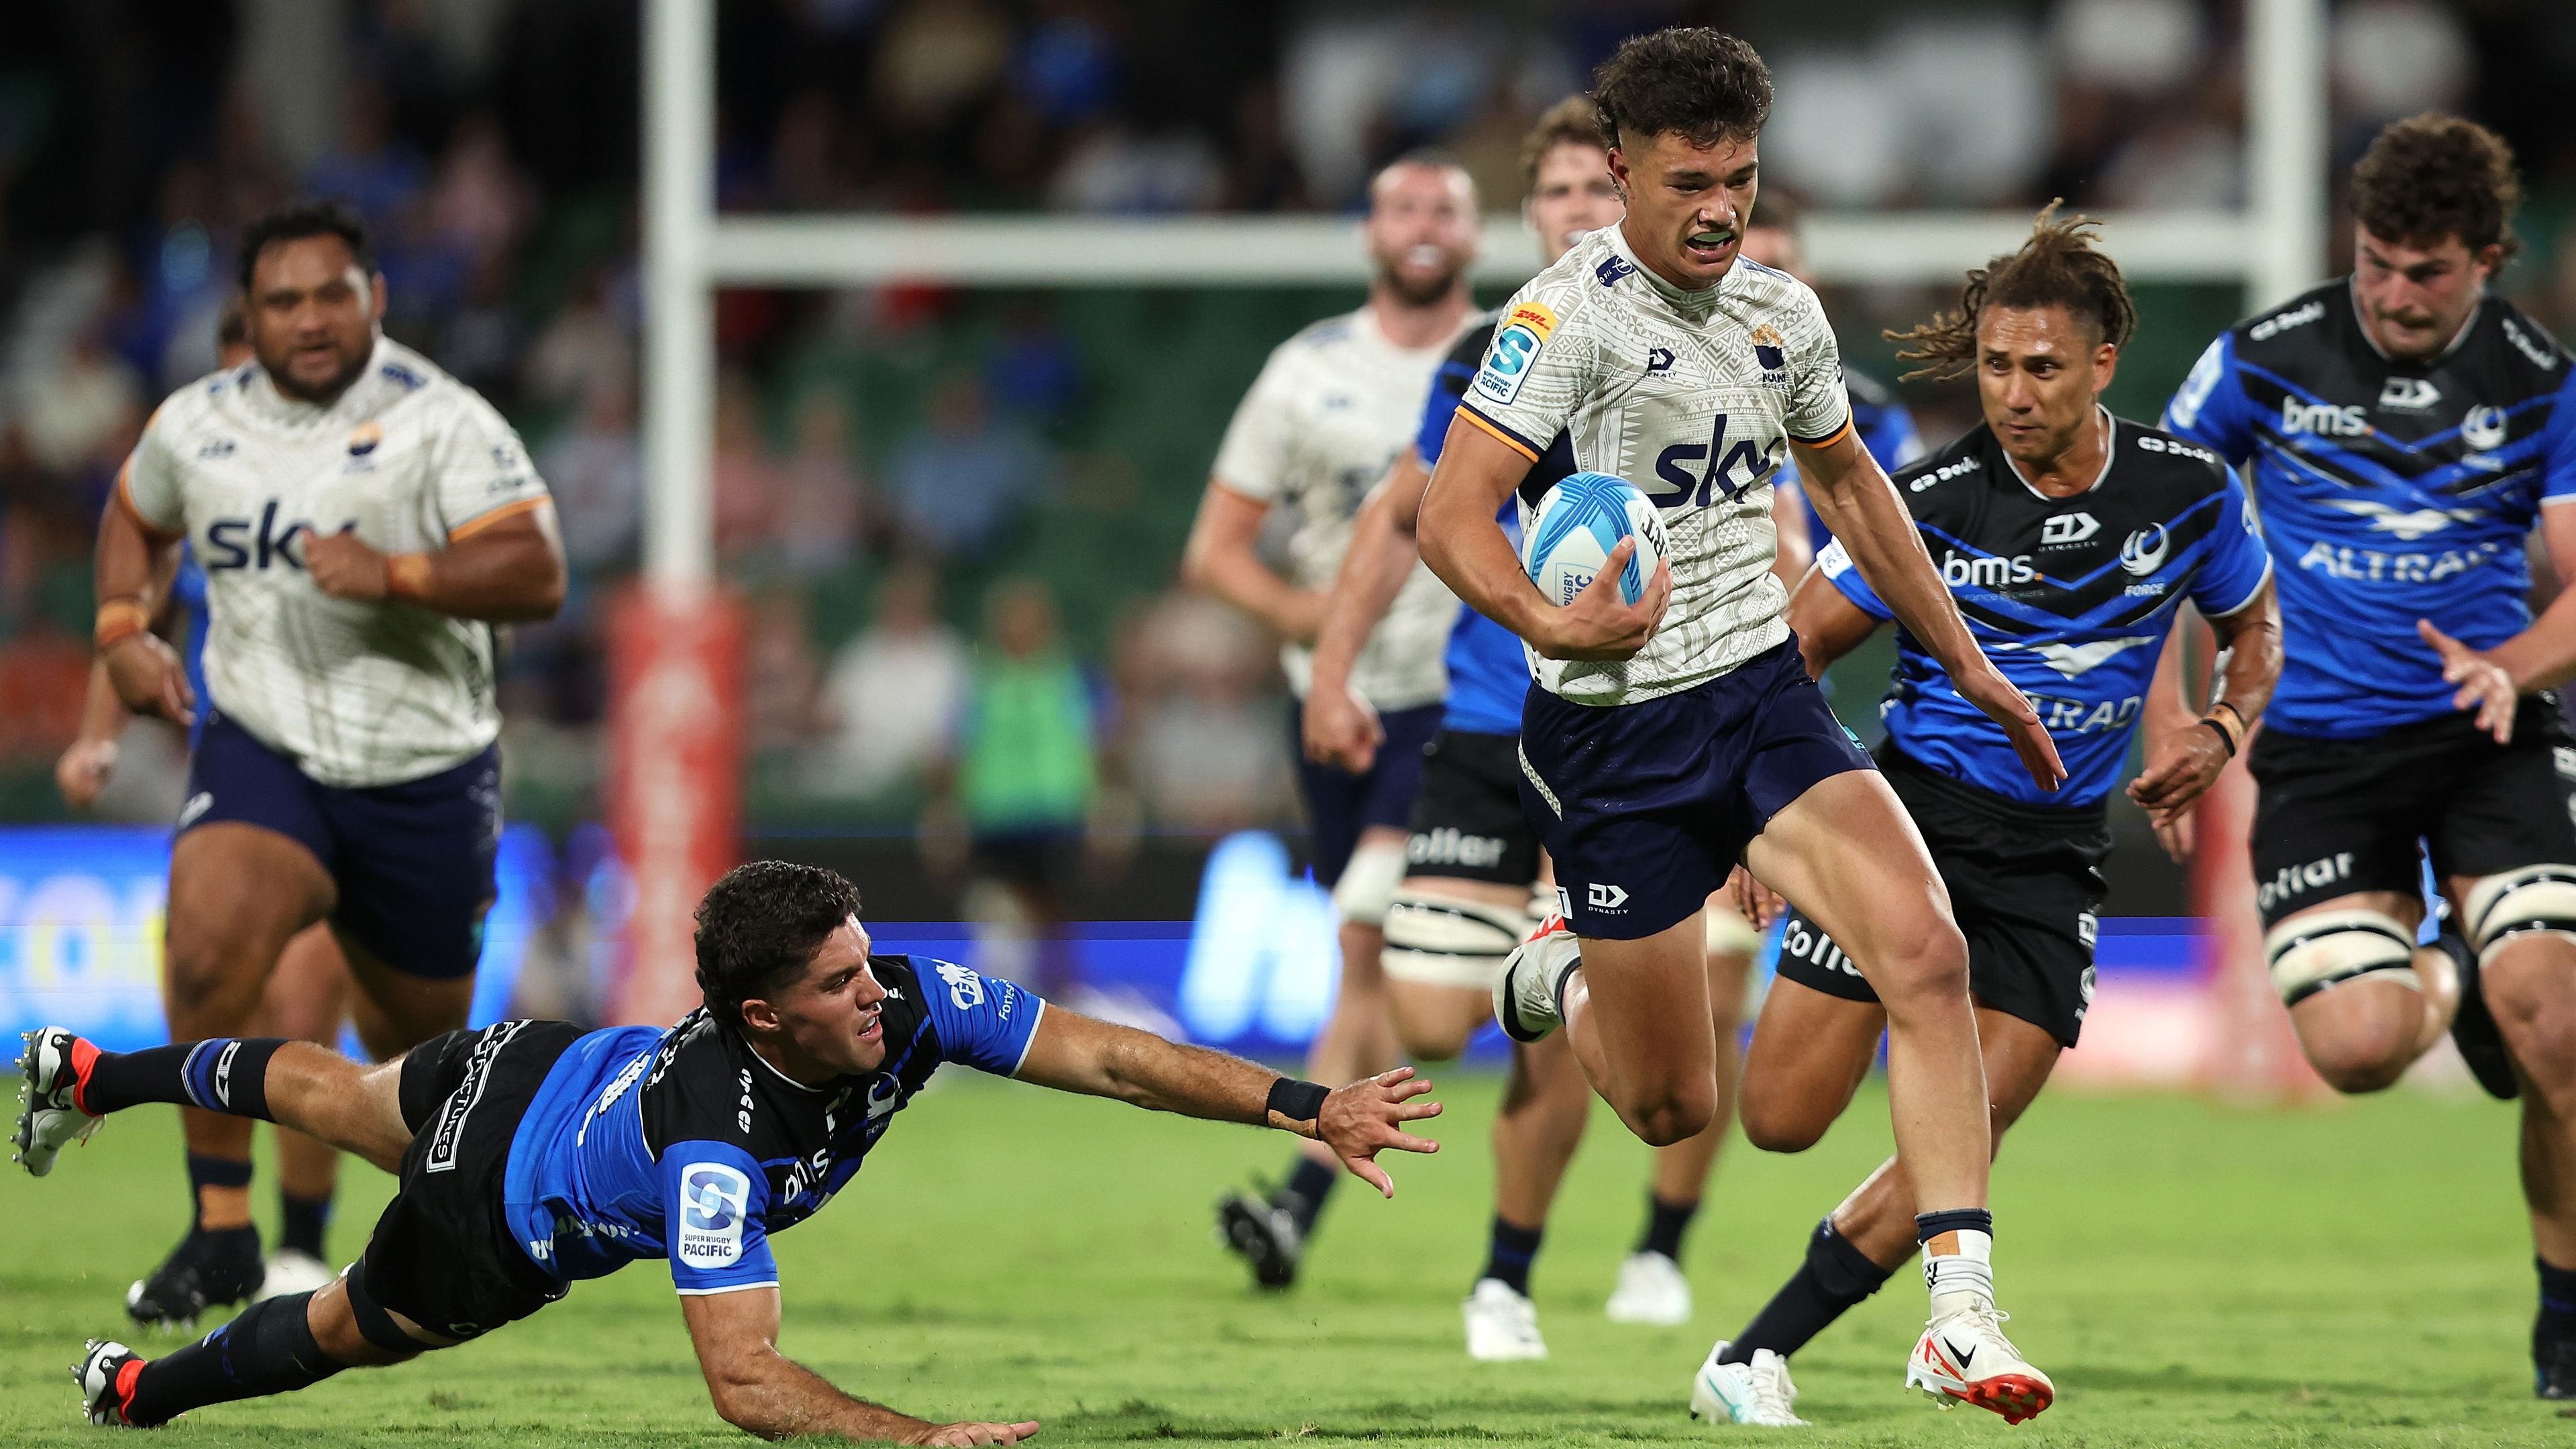 Kyren Taumoefolau of Moana Pasifika runs in for a try during the round four Super Rugby Pacific match between Western Force and Moana Pasifika.